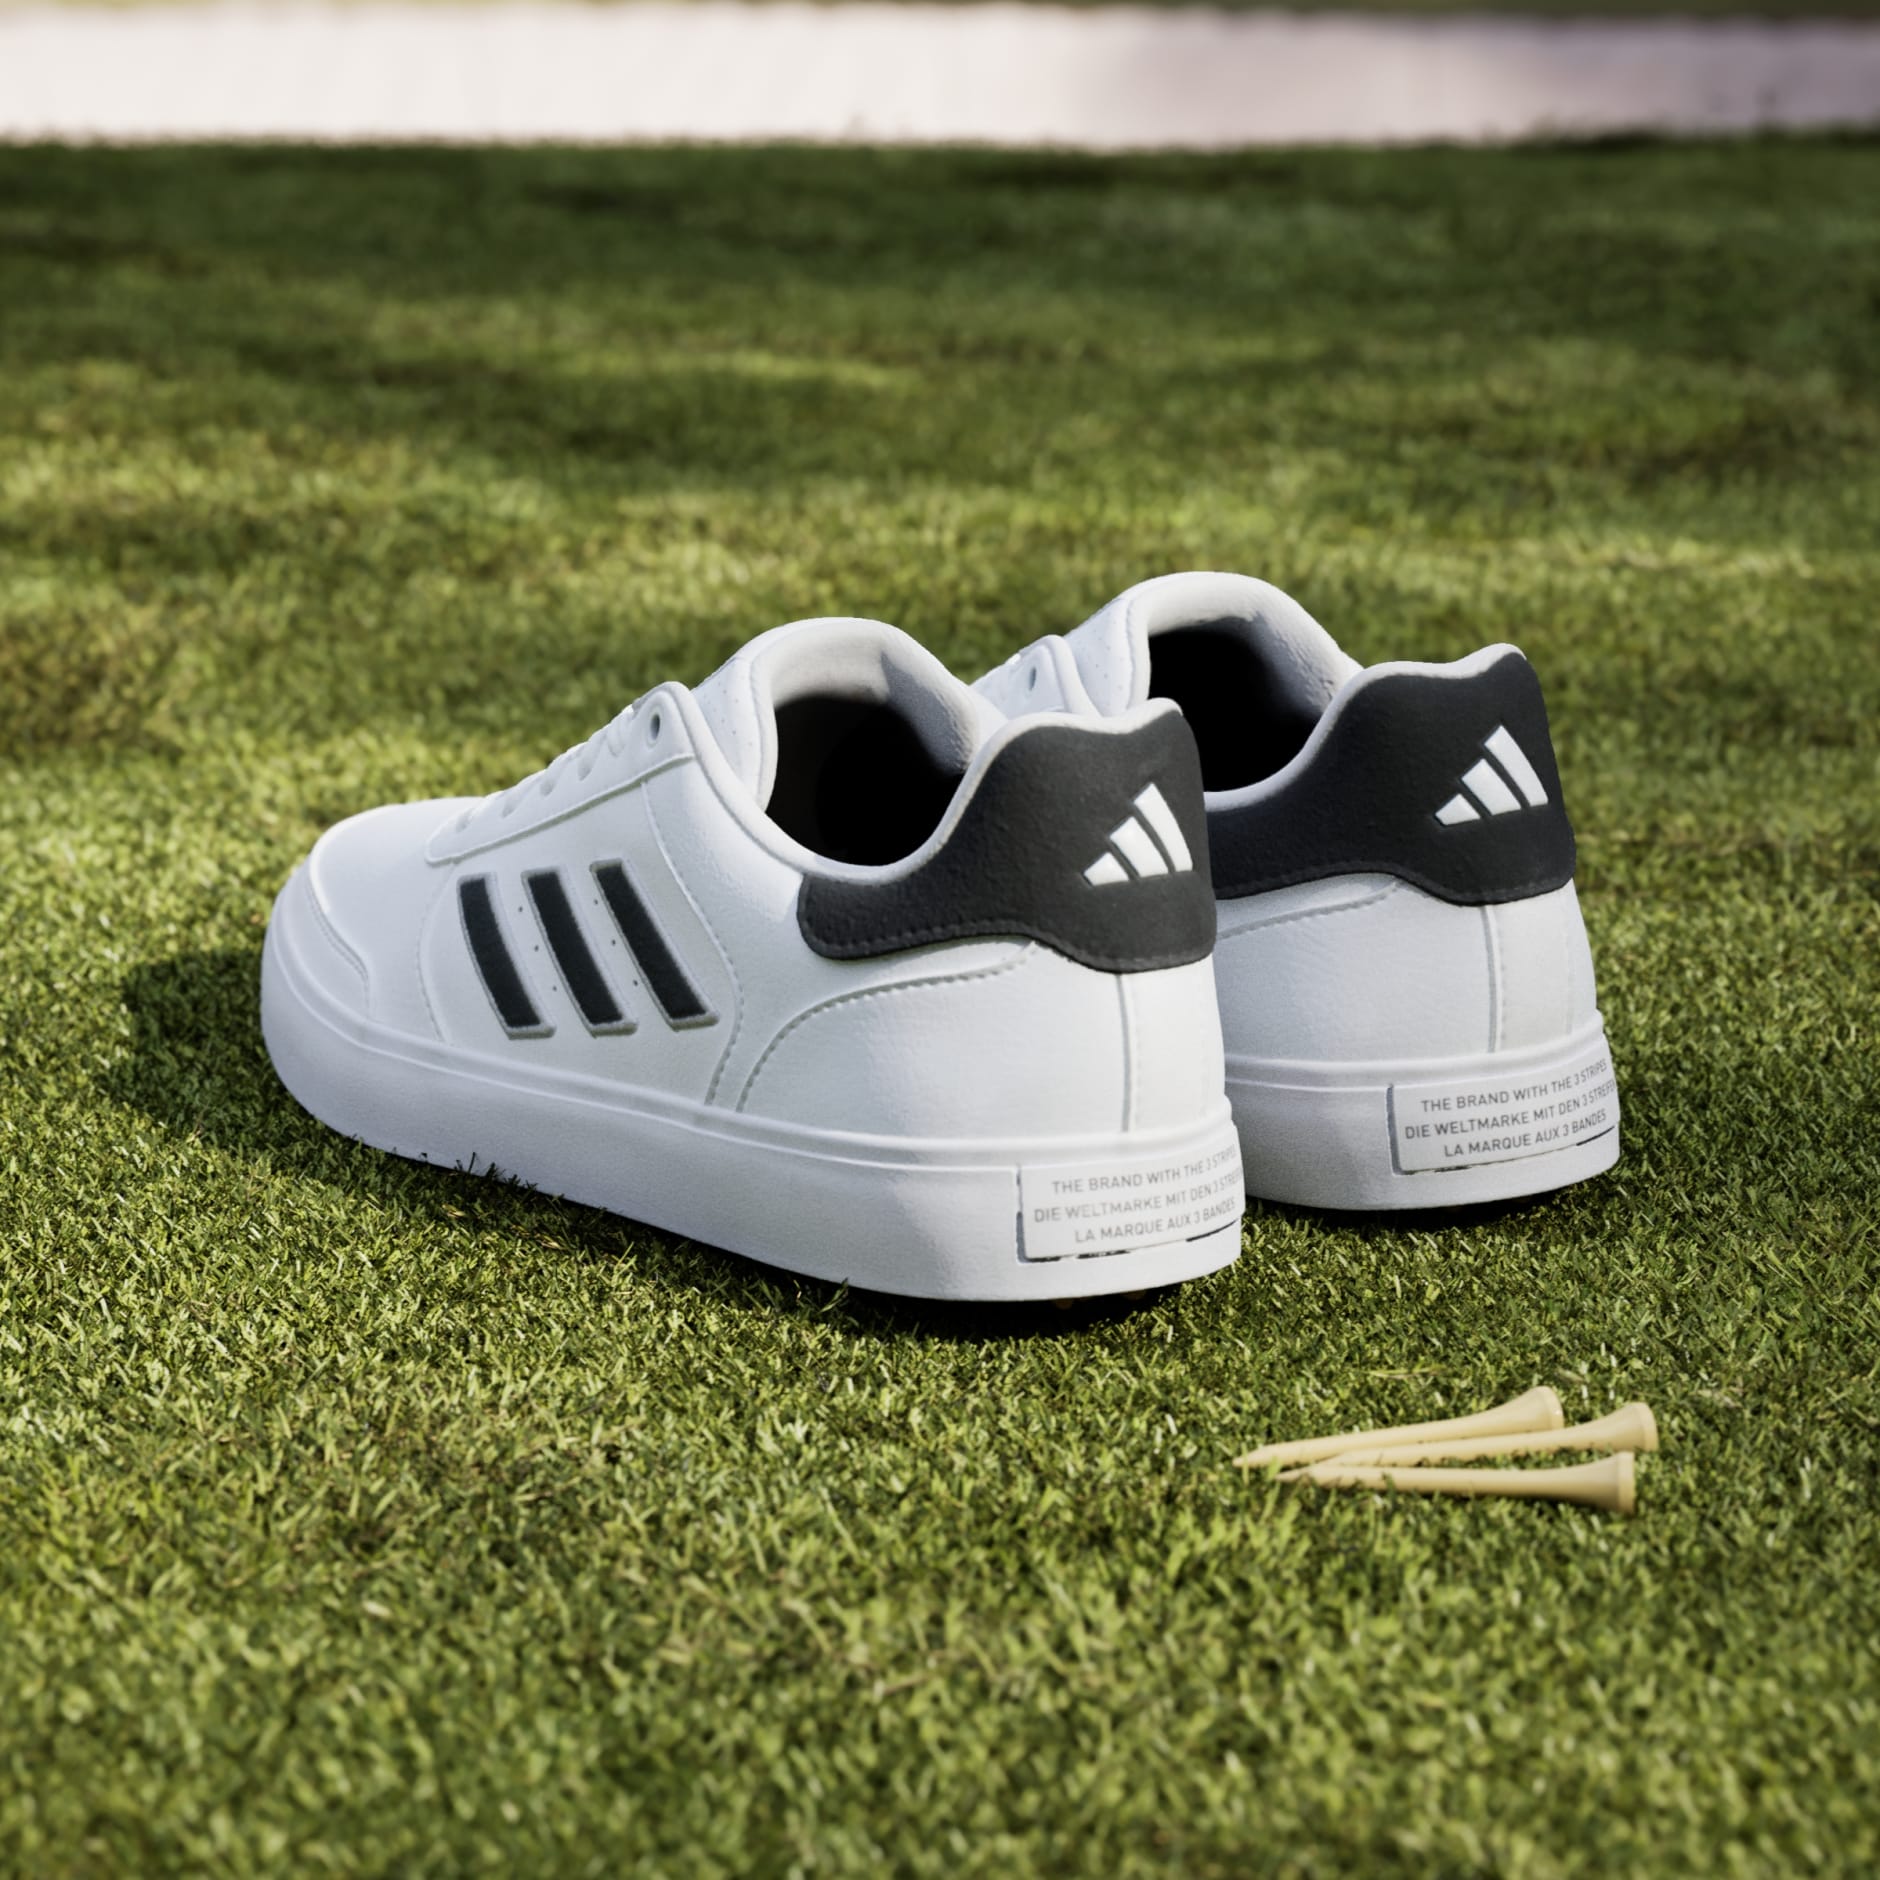 All products - Retrocross 24 Spikeless Golf Shoes - White | adidas ...